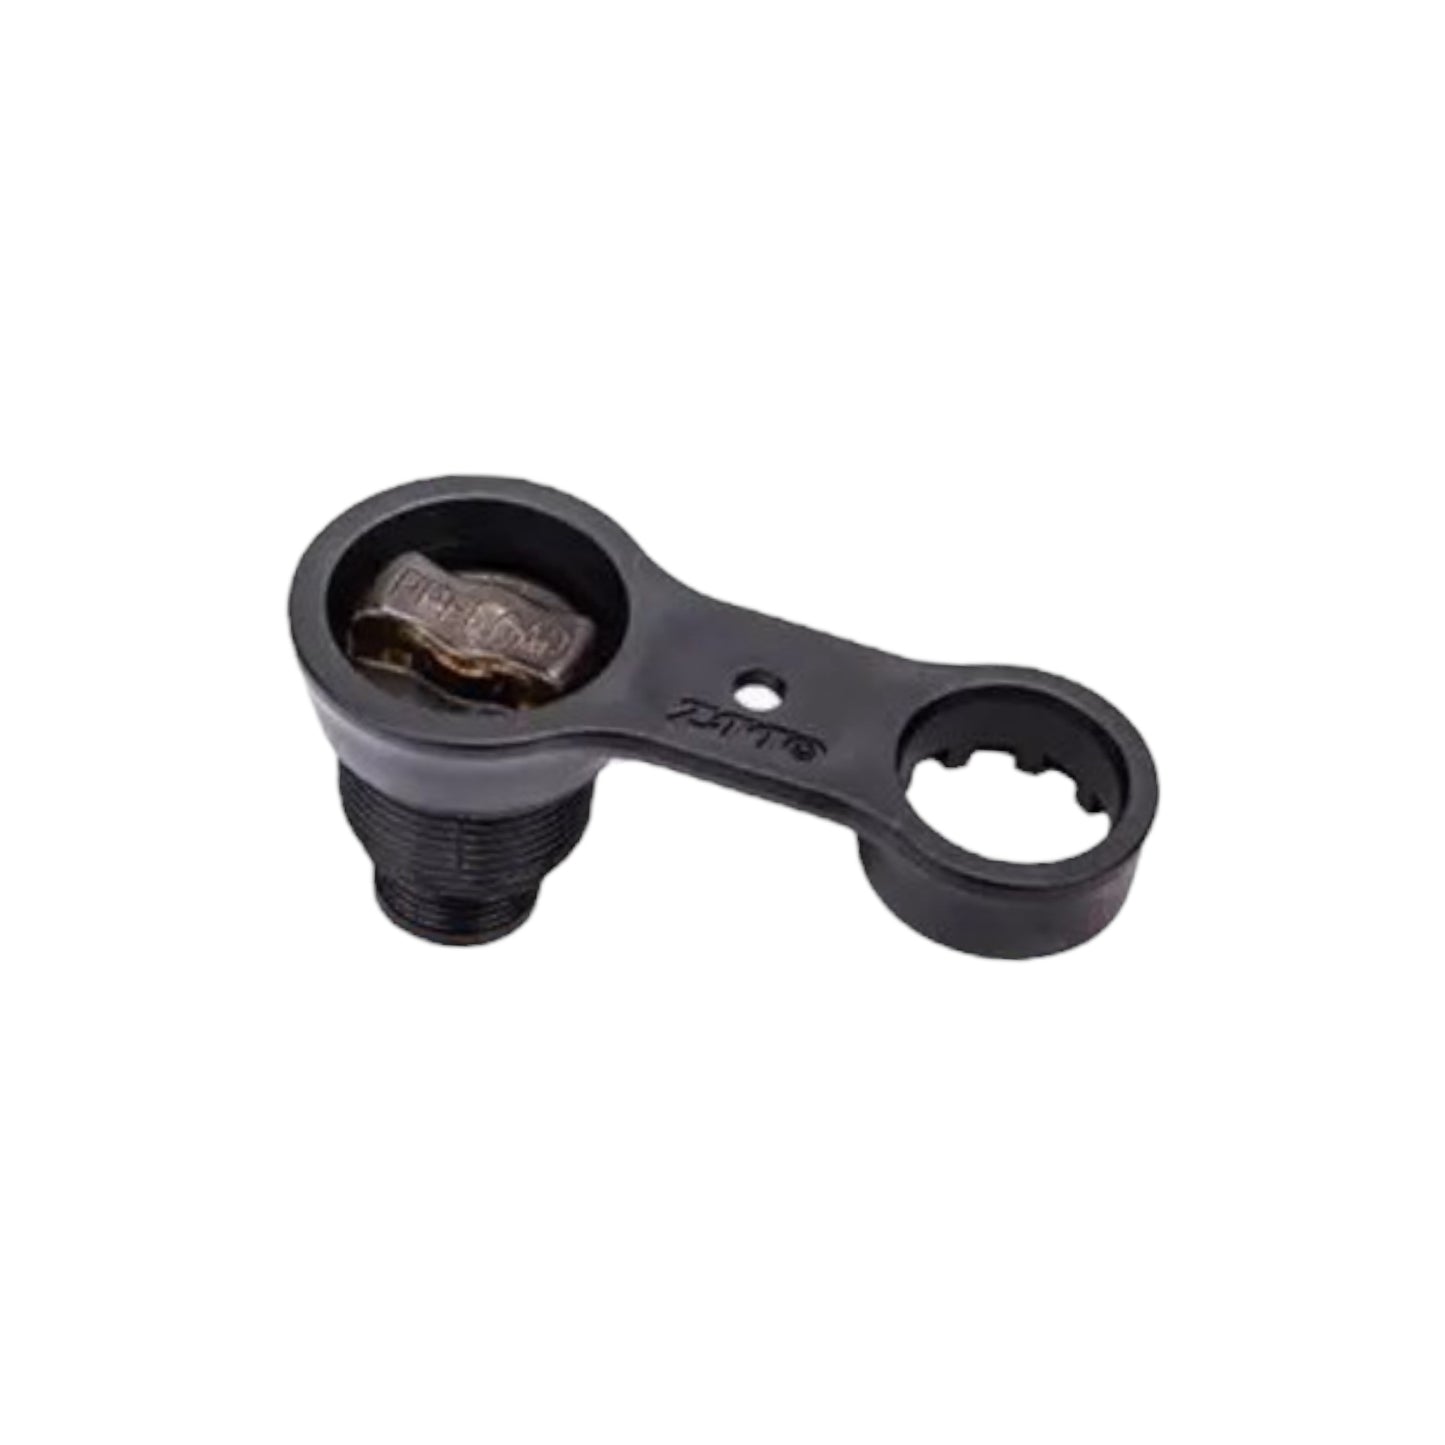 Suspension Fork Preload Dial Cap with Wrench